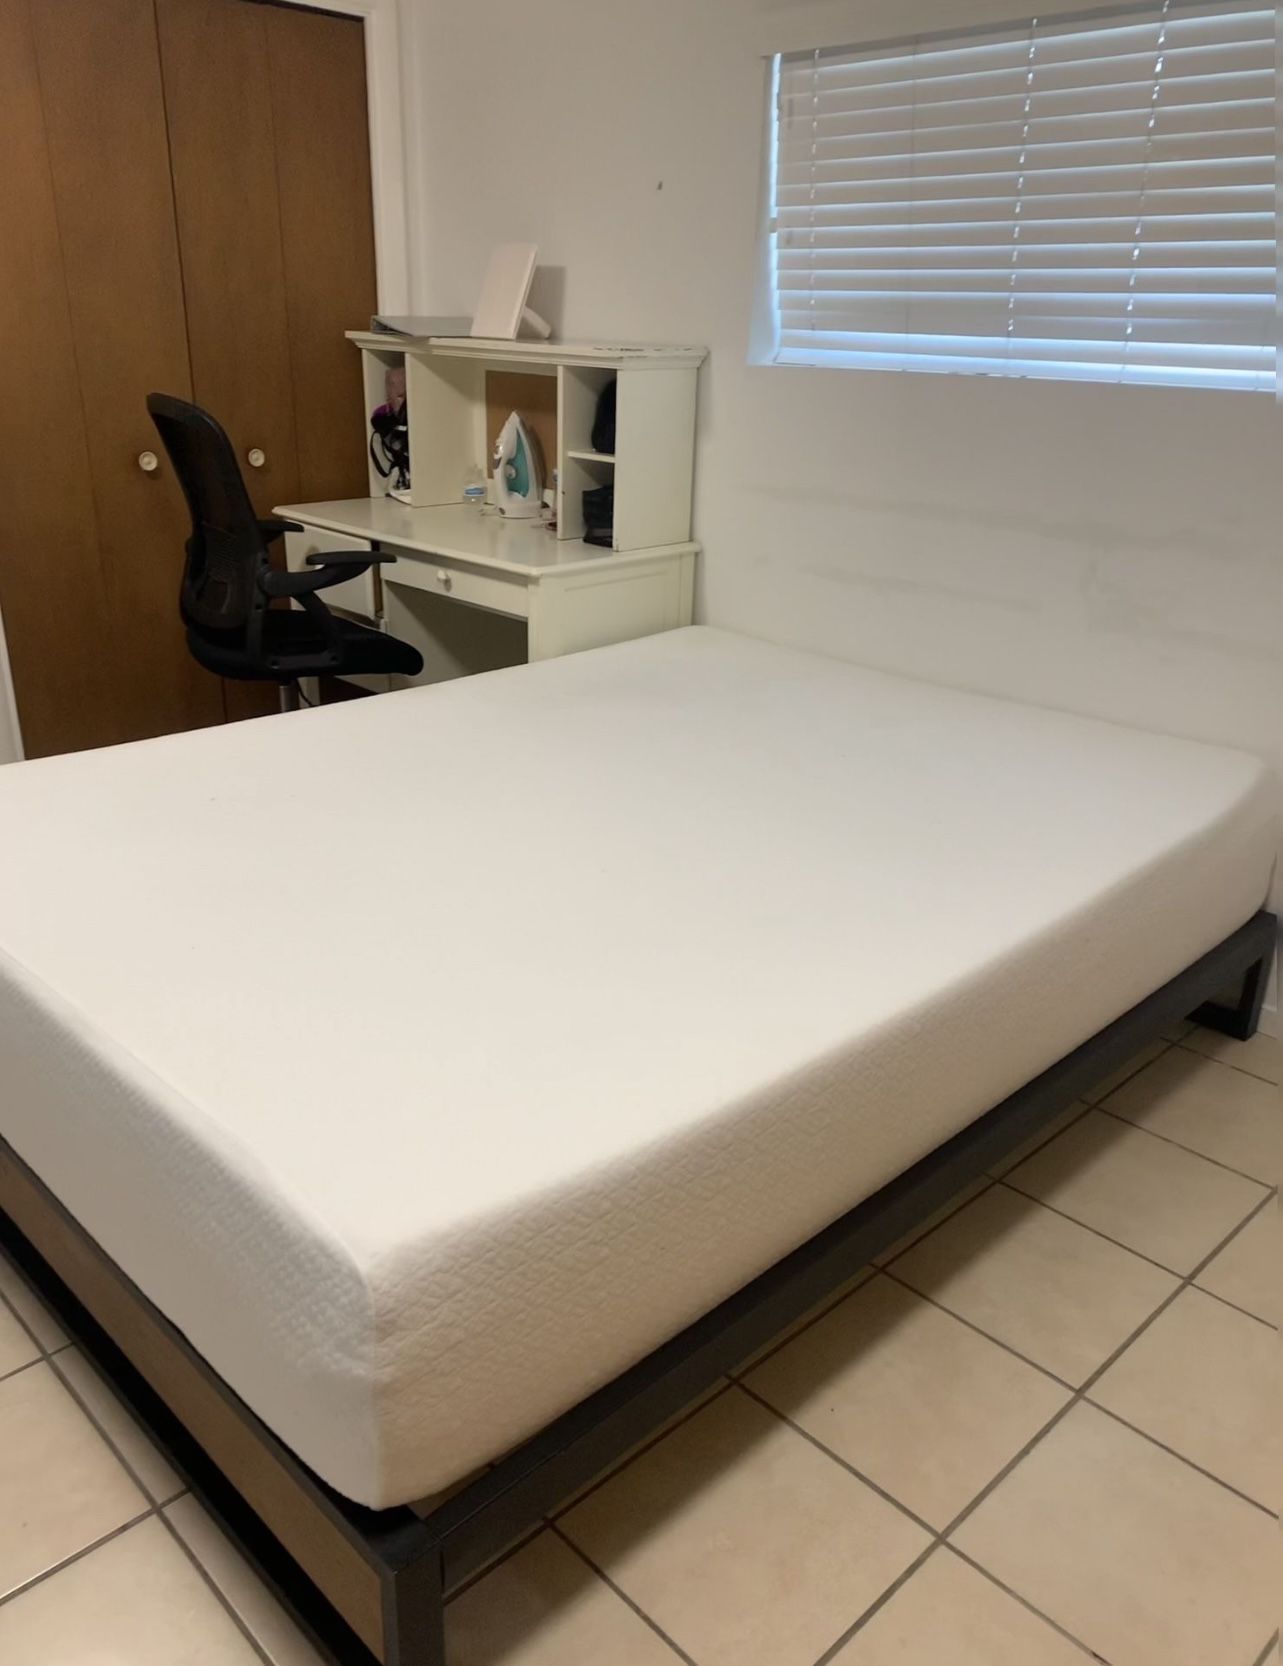 King Size Foam Mattress With Bed 